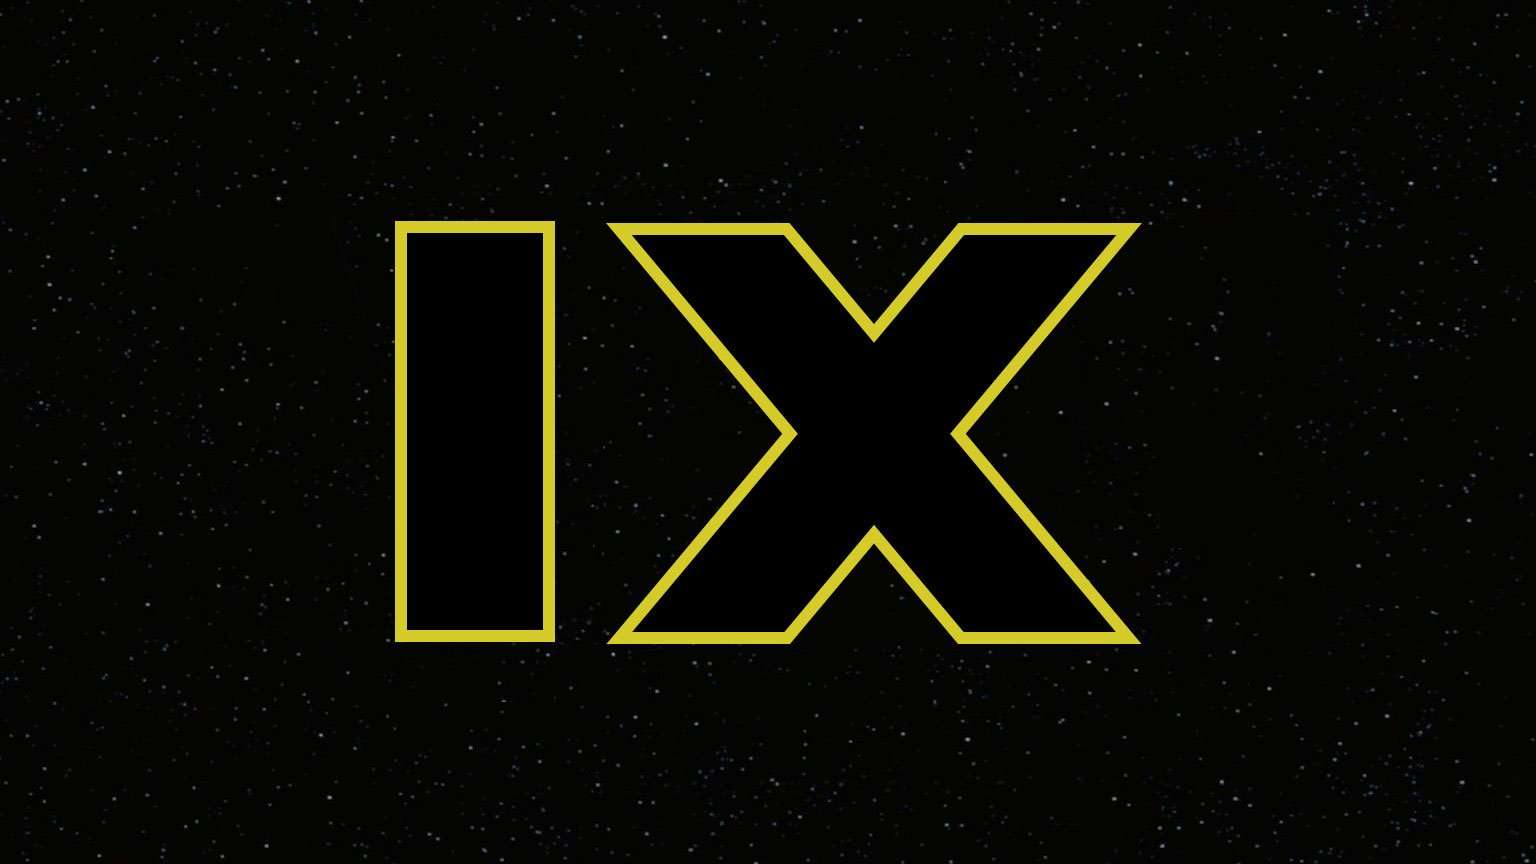 image for Star Wars: Episode IX Cast Announced